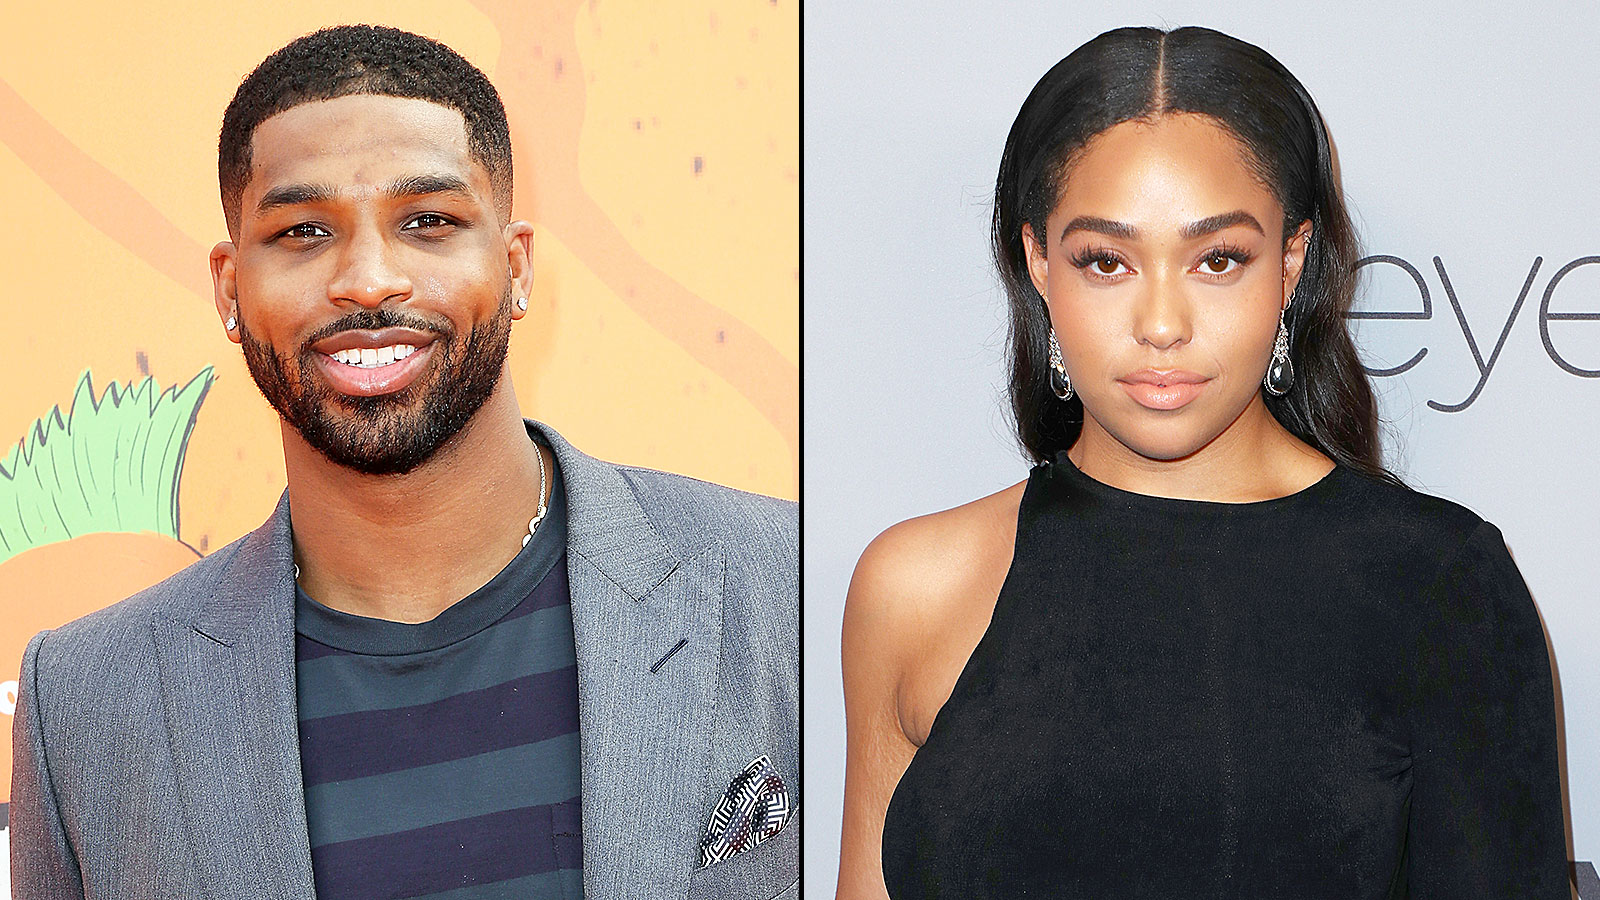 Jordyn Woods And Tristan Thompson 'Involved For Over A Month